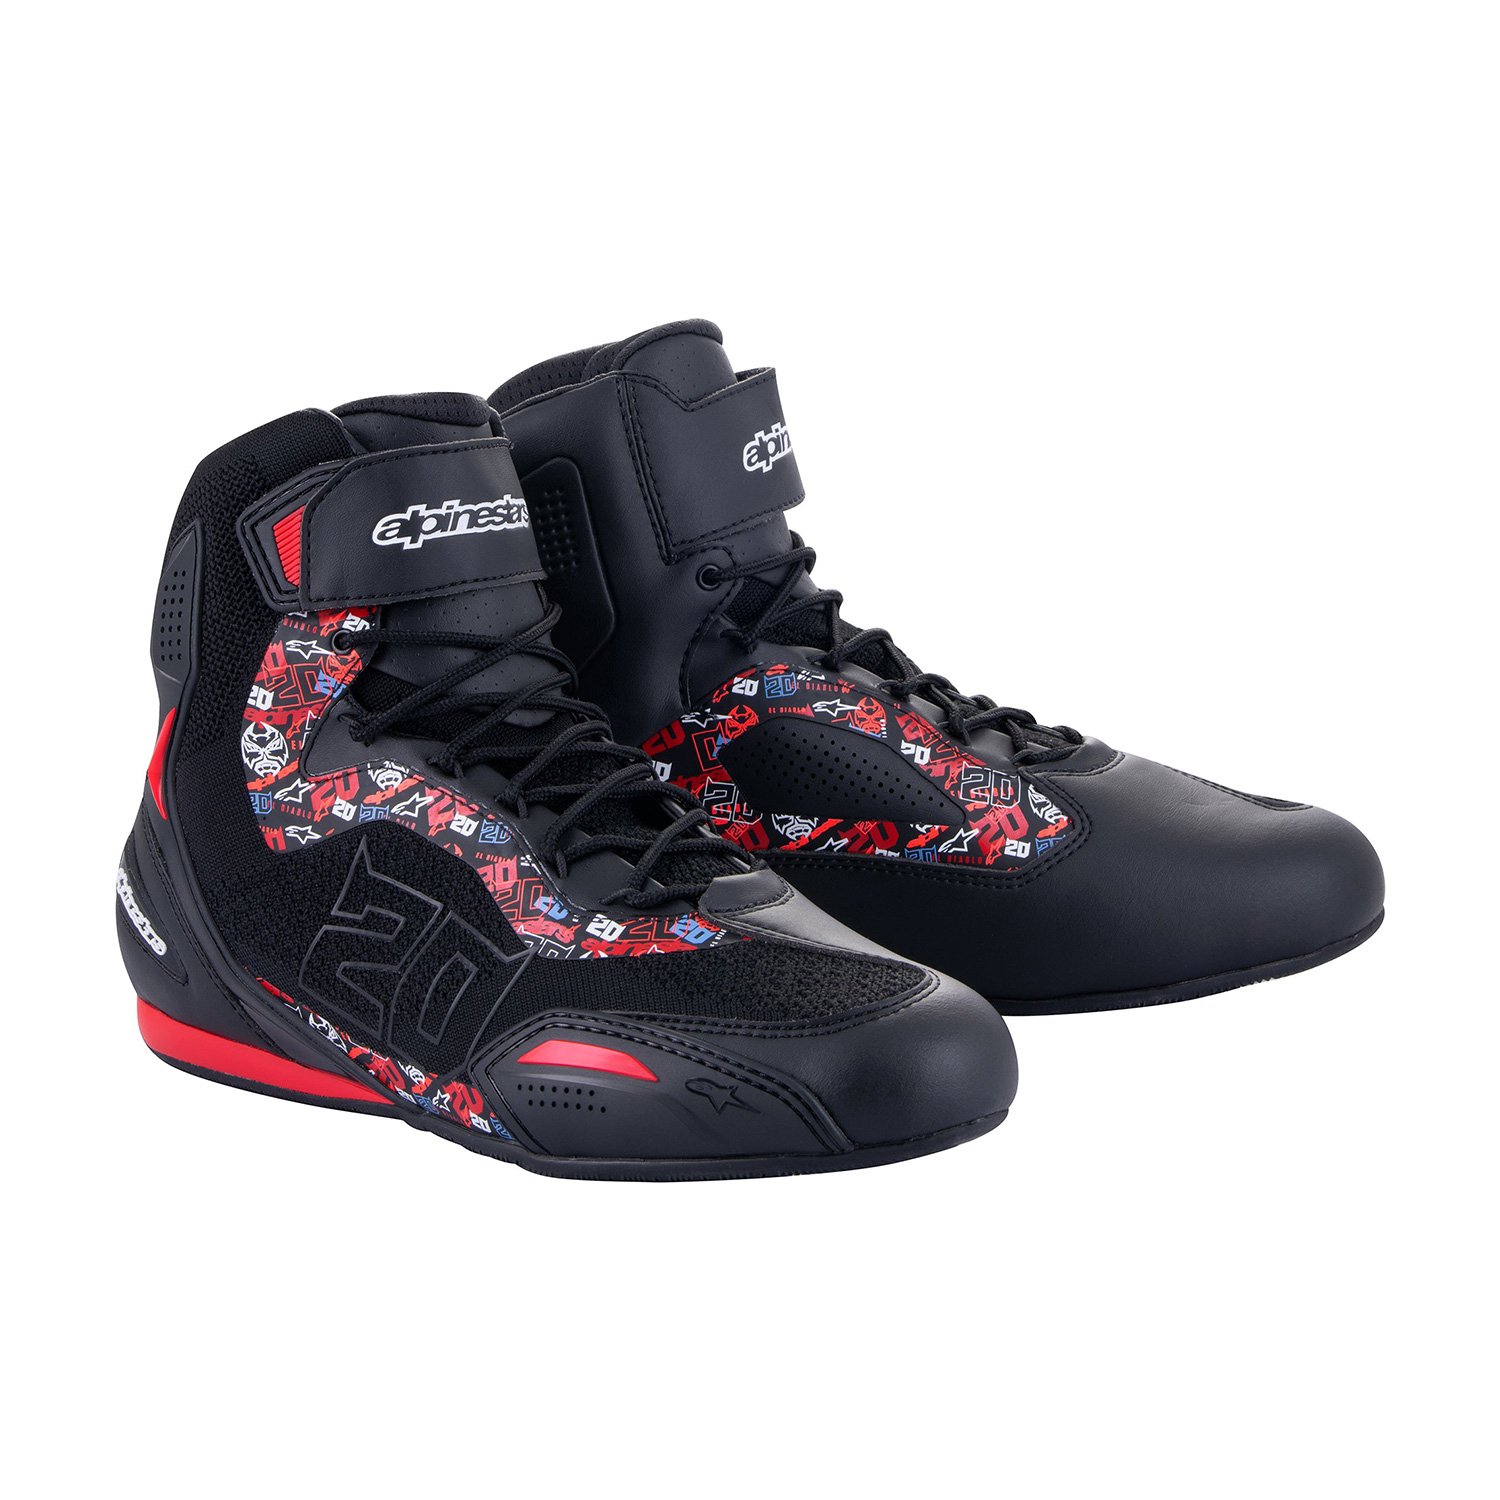 Image of EU Alpinestars FQ20 Faster-3 Rideknit Noir Bright Rouge Chaussures Taille US 11